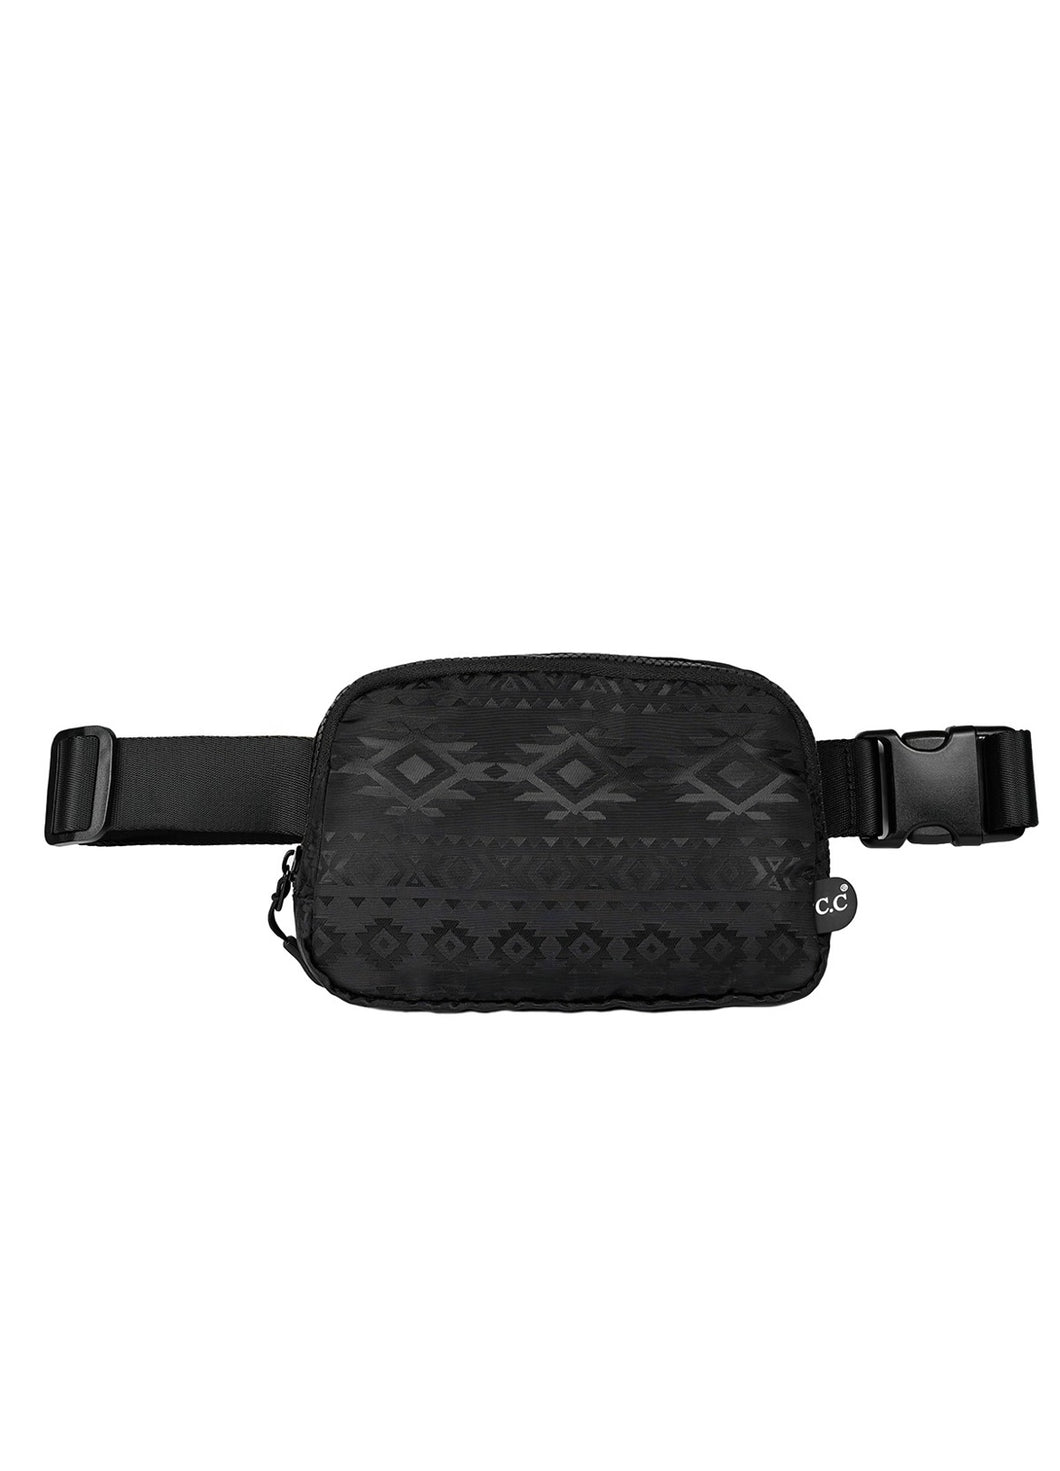 the 'rodeo' fanny pack